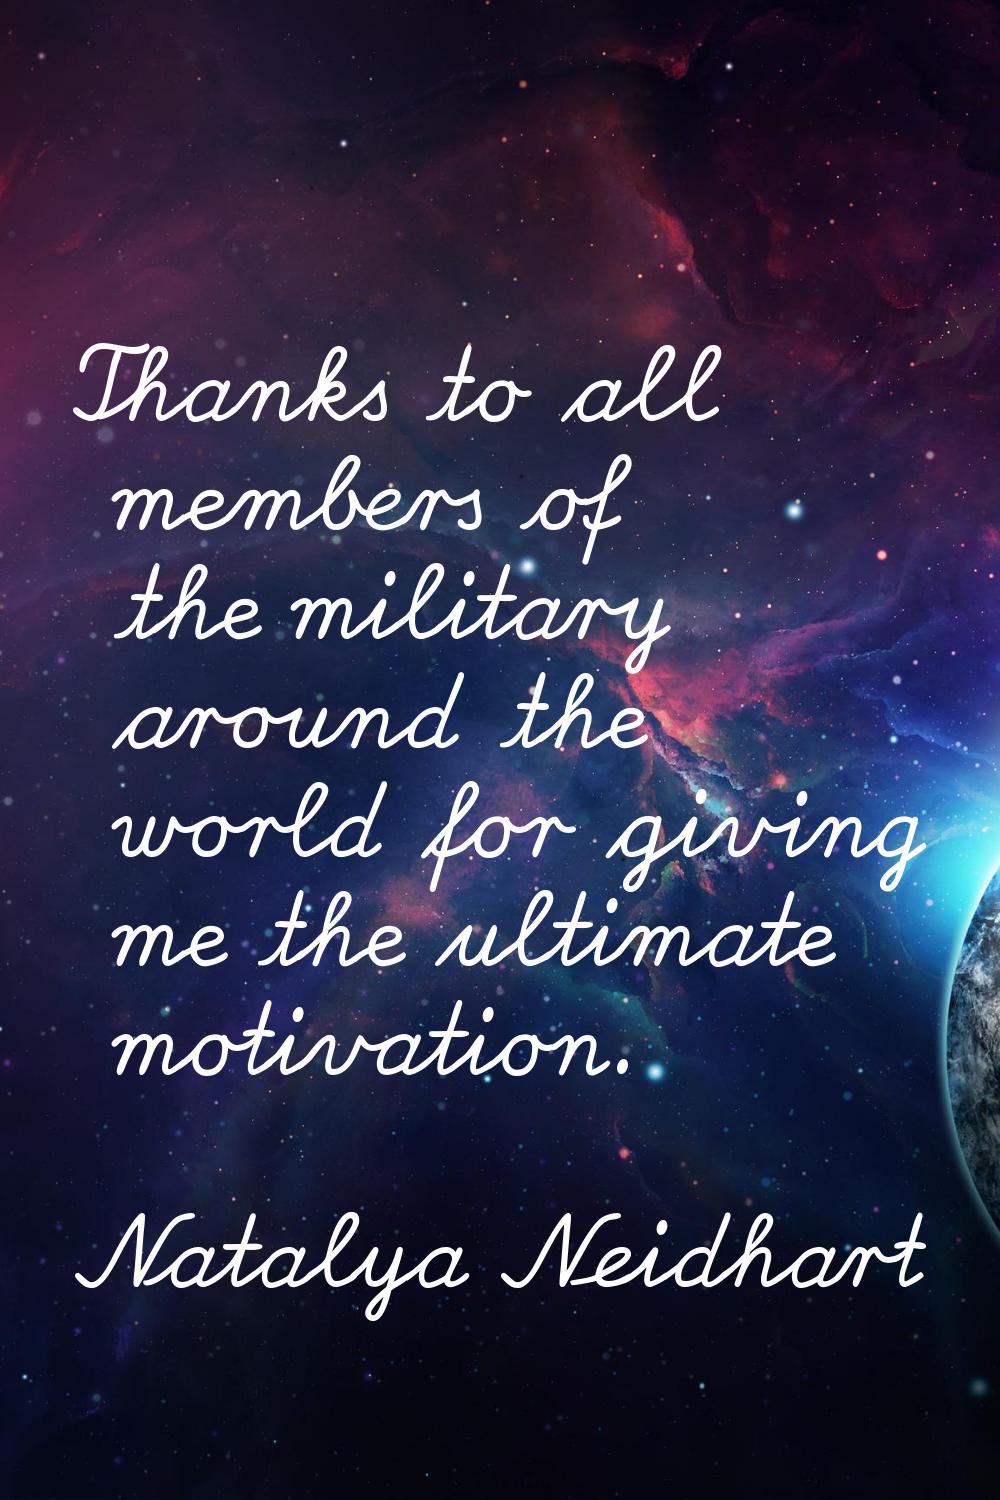 Thanks to all members of the military around the world for giving me the ultimate motivation.